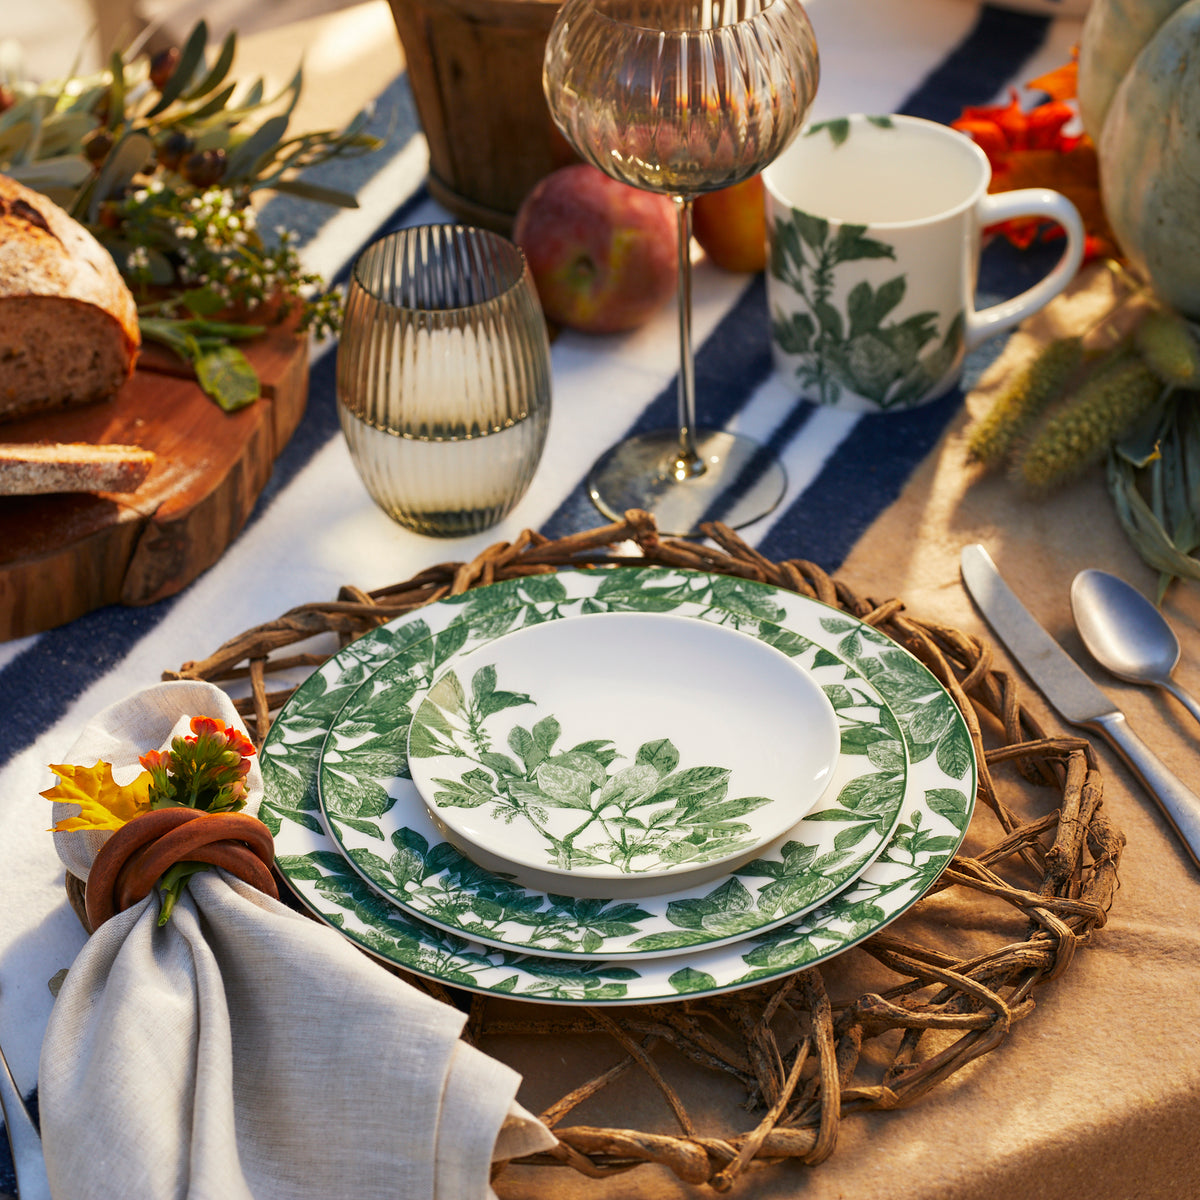 Outdoor dining table setup with botanical-themed premium porcelain plateware from the Arbor Green Salad Plate collection, rustic bread, fresh fruit, and ambient lighting at golden hour. Brand Name: Caskata